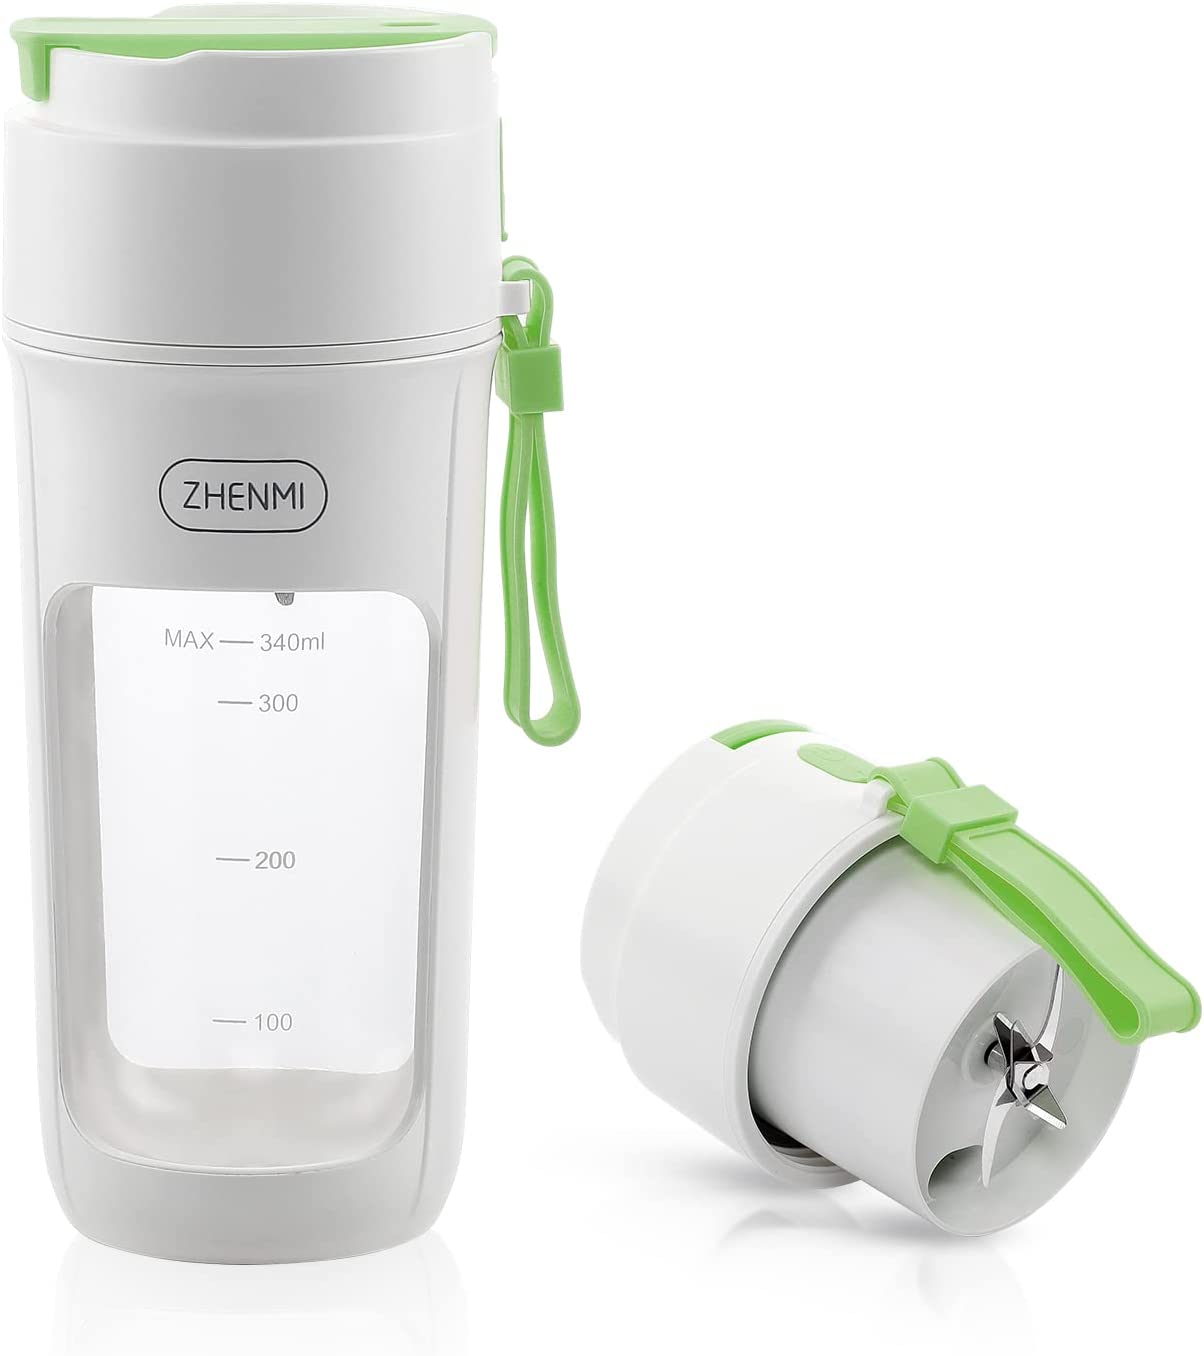 340ml Portable USB Rechargeable 8 Blades Stainless Steel Blender in green color